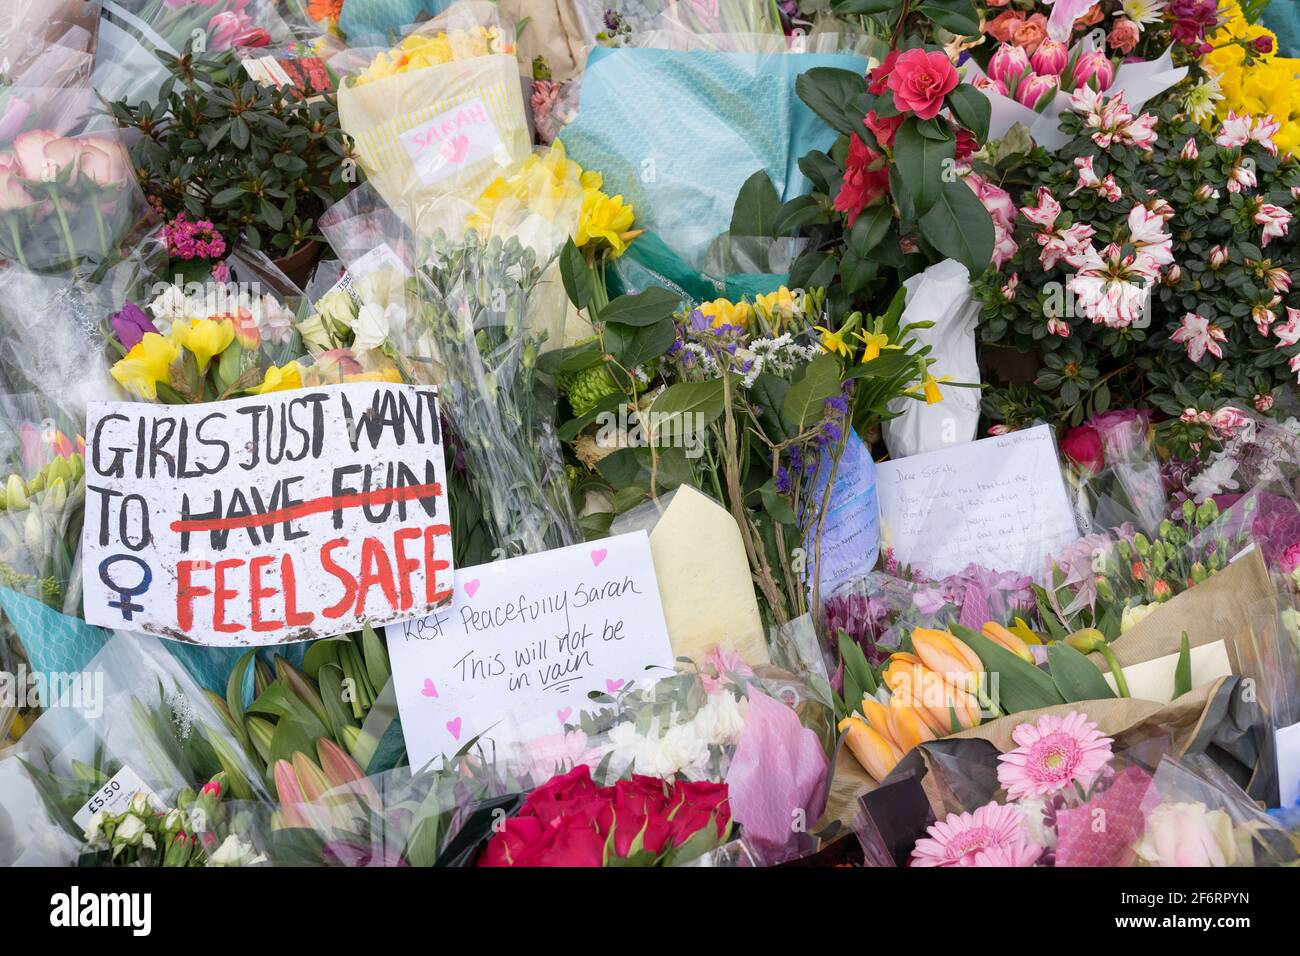 Floral tributes and message left at Clapham command bandstand for Sarah Everard, who was kidnapped and murdered by  suspect Met Police officer Wayne Stock Photo